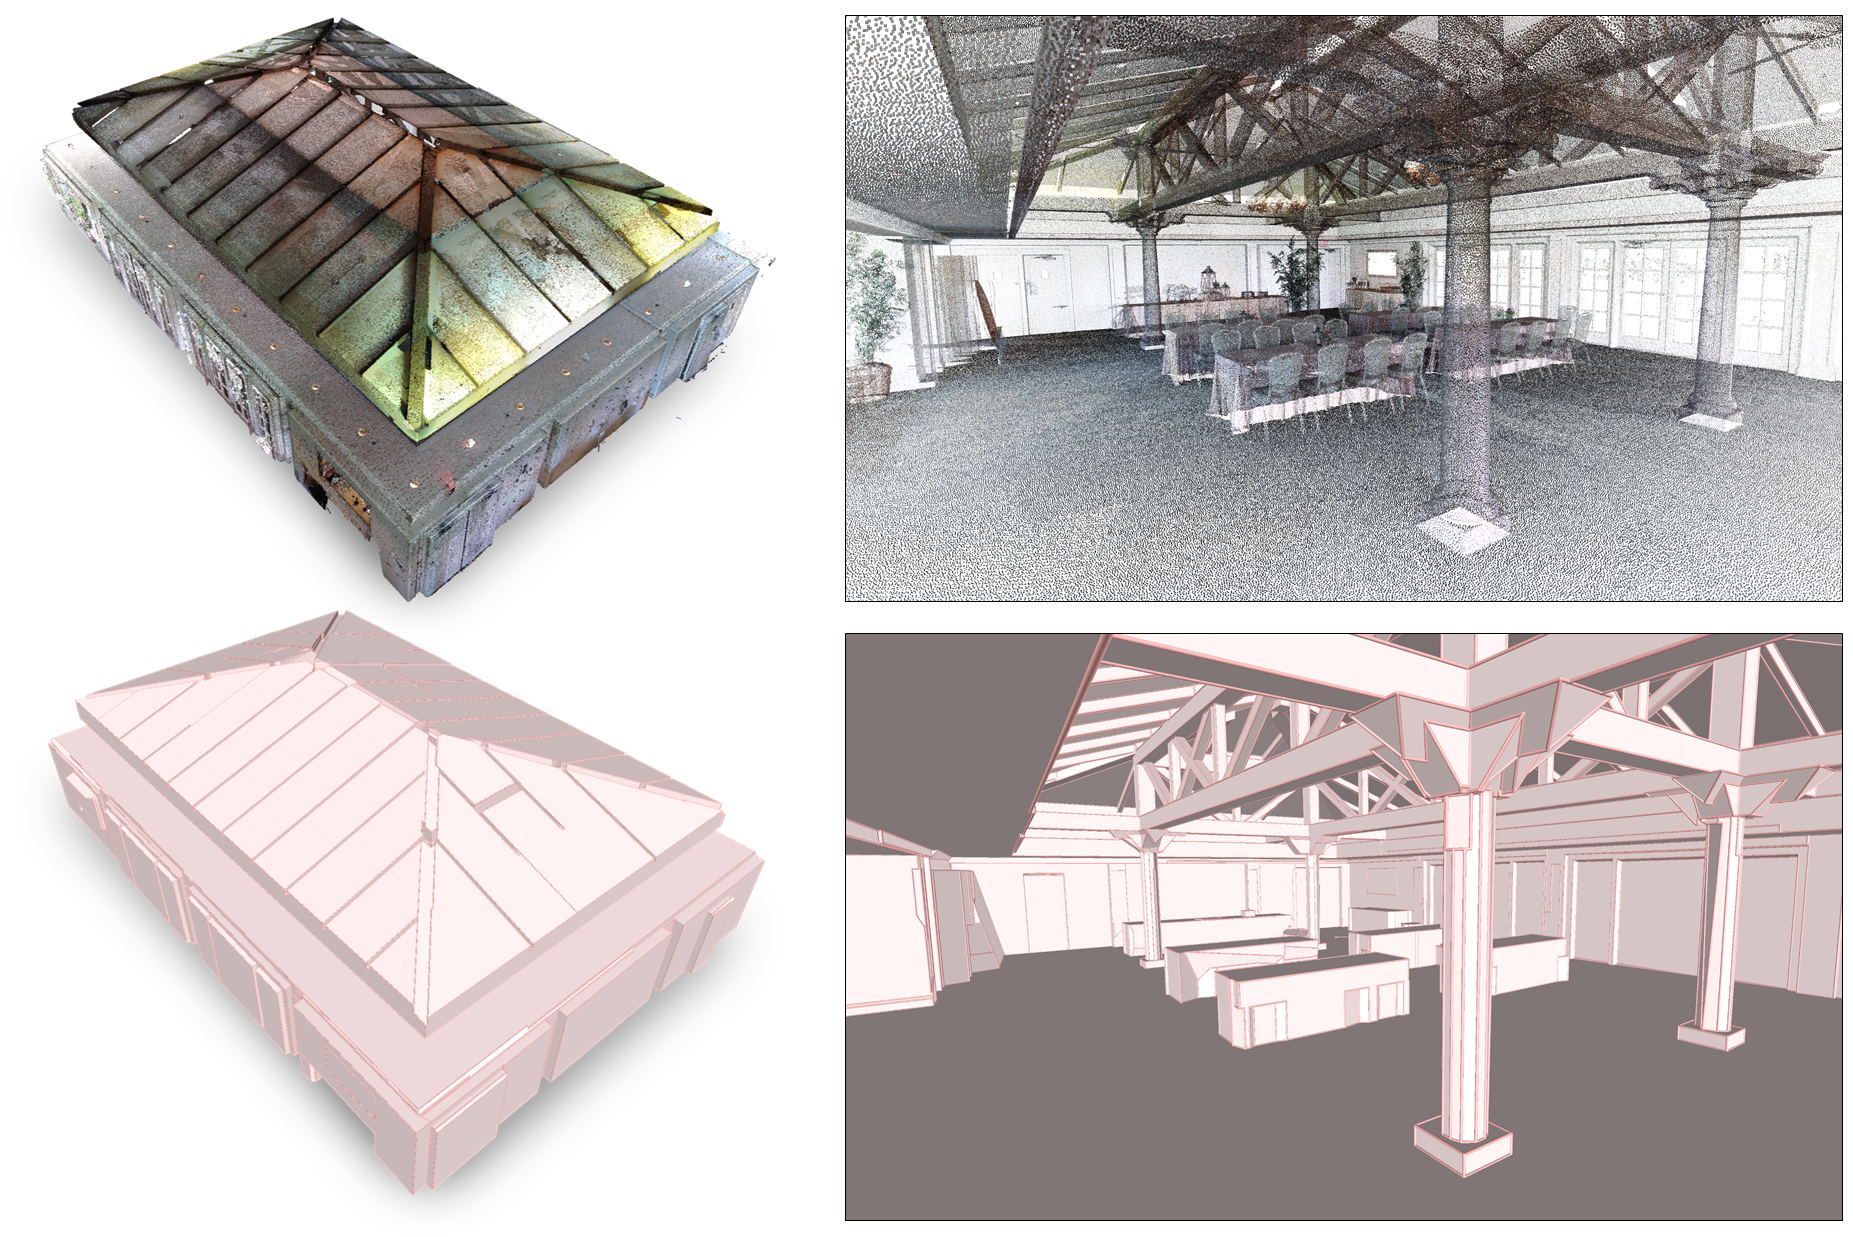 Kinetic Shape Reconstruction. Our algorithm converts a point cloud (top), here a 3M points laser scan, into a concise and watertight polygon mesh (bottom), in an automated manner. Planar components of the indoor scene (beams, walls, windows..) are captured by large facets whereas freeform objects (columns, tables...) are approximated by a low number of facets. Small objects (chairs, plants..) are filtered out.